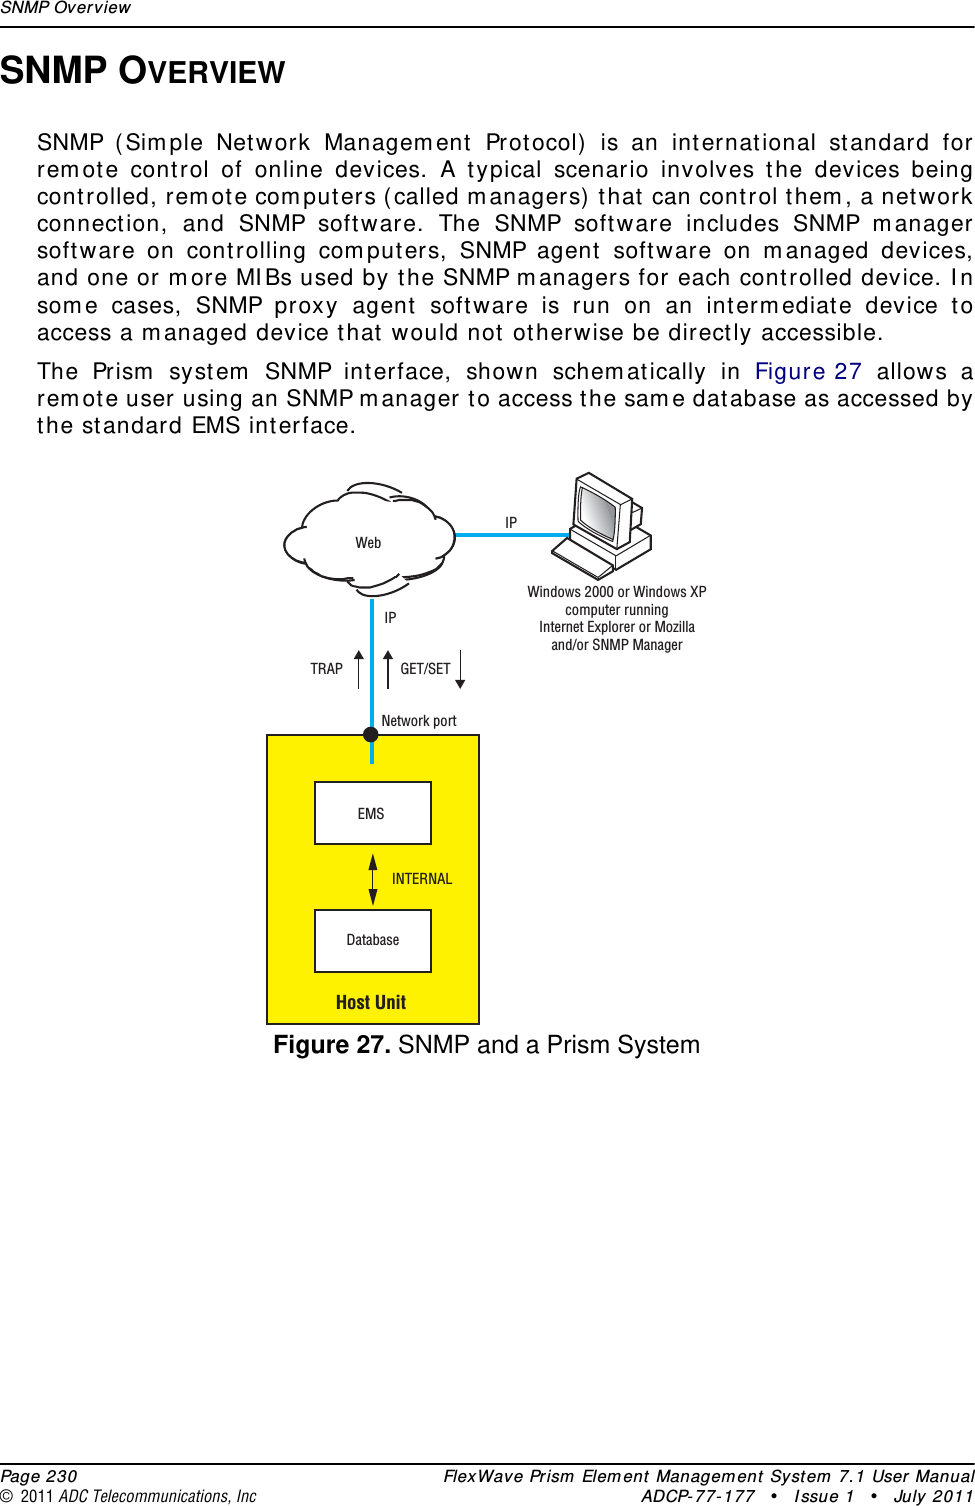 SNMP Overview  Page 230 FlexWave Prism  Elem ent Managem ent  System  7.1 User Manual© 2011 ADC Telecommunications, Inc ADCP-77- 177 • I ssue 1 • July 2011SNMP OVERVIEWSNMP ( Sim ple Net work Managem ent  Protocol)  is an international st andard for rem ot e control of online devices. A t ypical scenario involves t he devices being cont rolled, rem ot e com puters ( called m anagers)  that  can cont rol them , a network connect ion, and SNMP soft ware. The SNMP software includes SNMP m anager soft ware on cont rolling com put ers, SNMP agent  soft ware on m anaged devices, and one or m ore MI Bs used by the SNMP m anagers for each cont rolled device. I n som e cases, SNMP proxy agent software is run on an int erm ediate device t o access a m anaged device t hat would not  ot herwise be directly accessible.The Prism  syst em  SNMP int erface, shown schem at ically in Figure 27 allows a rem ot e user using an SNMP m anager t o access t he sam e dat abase as accessed by the st andard EMS interface.Figure 27. SNMP and a Prism SystemIPIPWebGET/SETTRAPWindows 2000 or Windows XPcomputer runningInternet Explorer or Mozillaand/or SNMP ManagerDatabaseEMSINTERNALNetwork portHost Unit